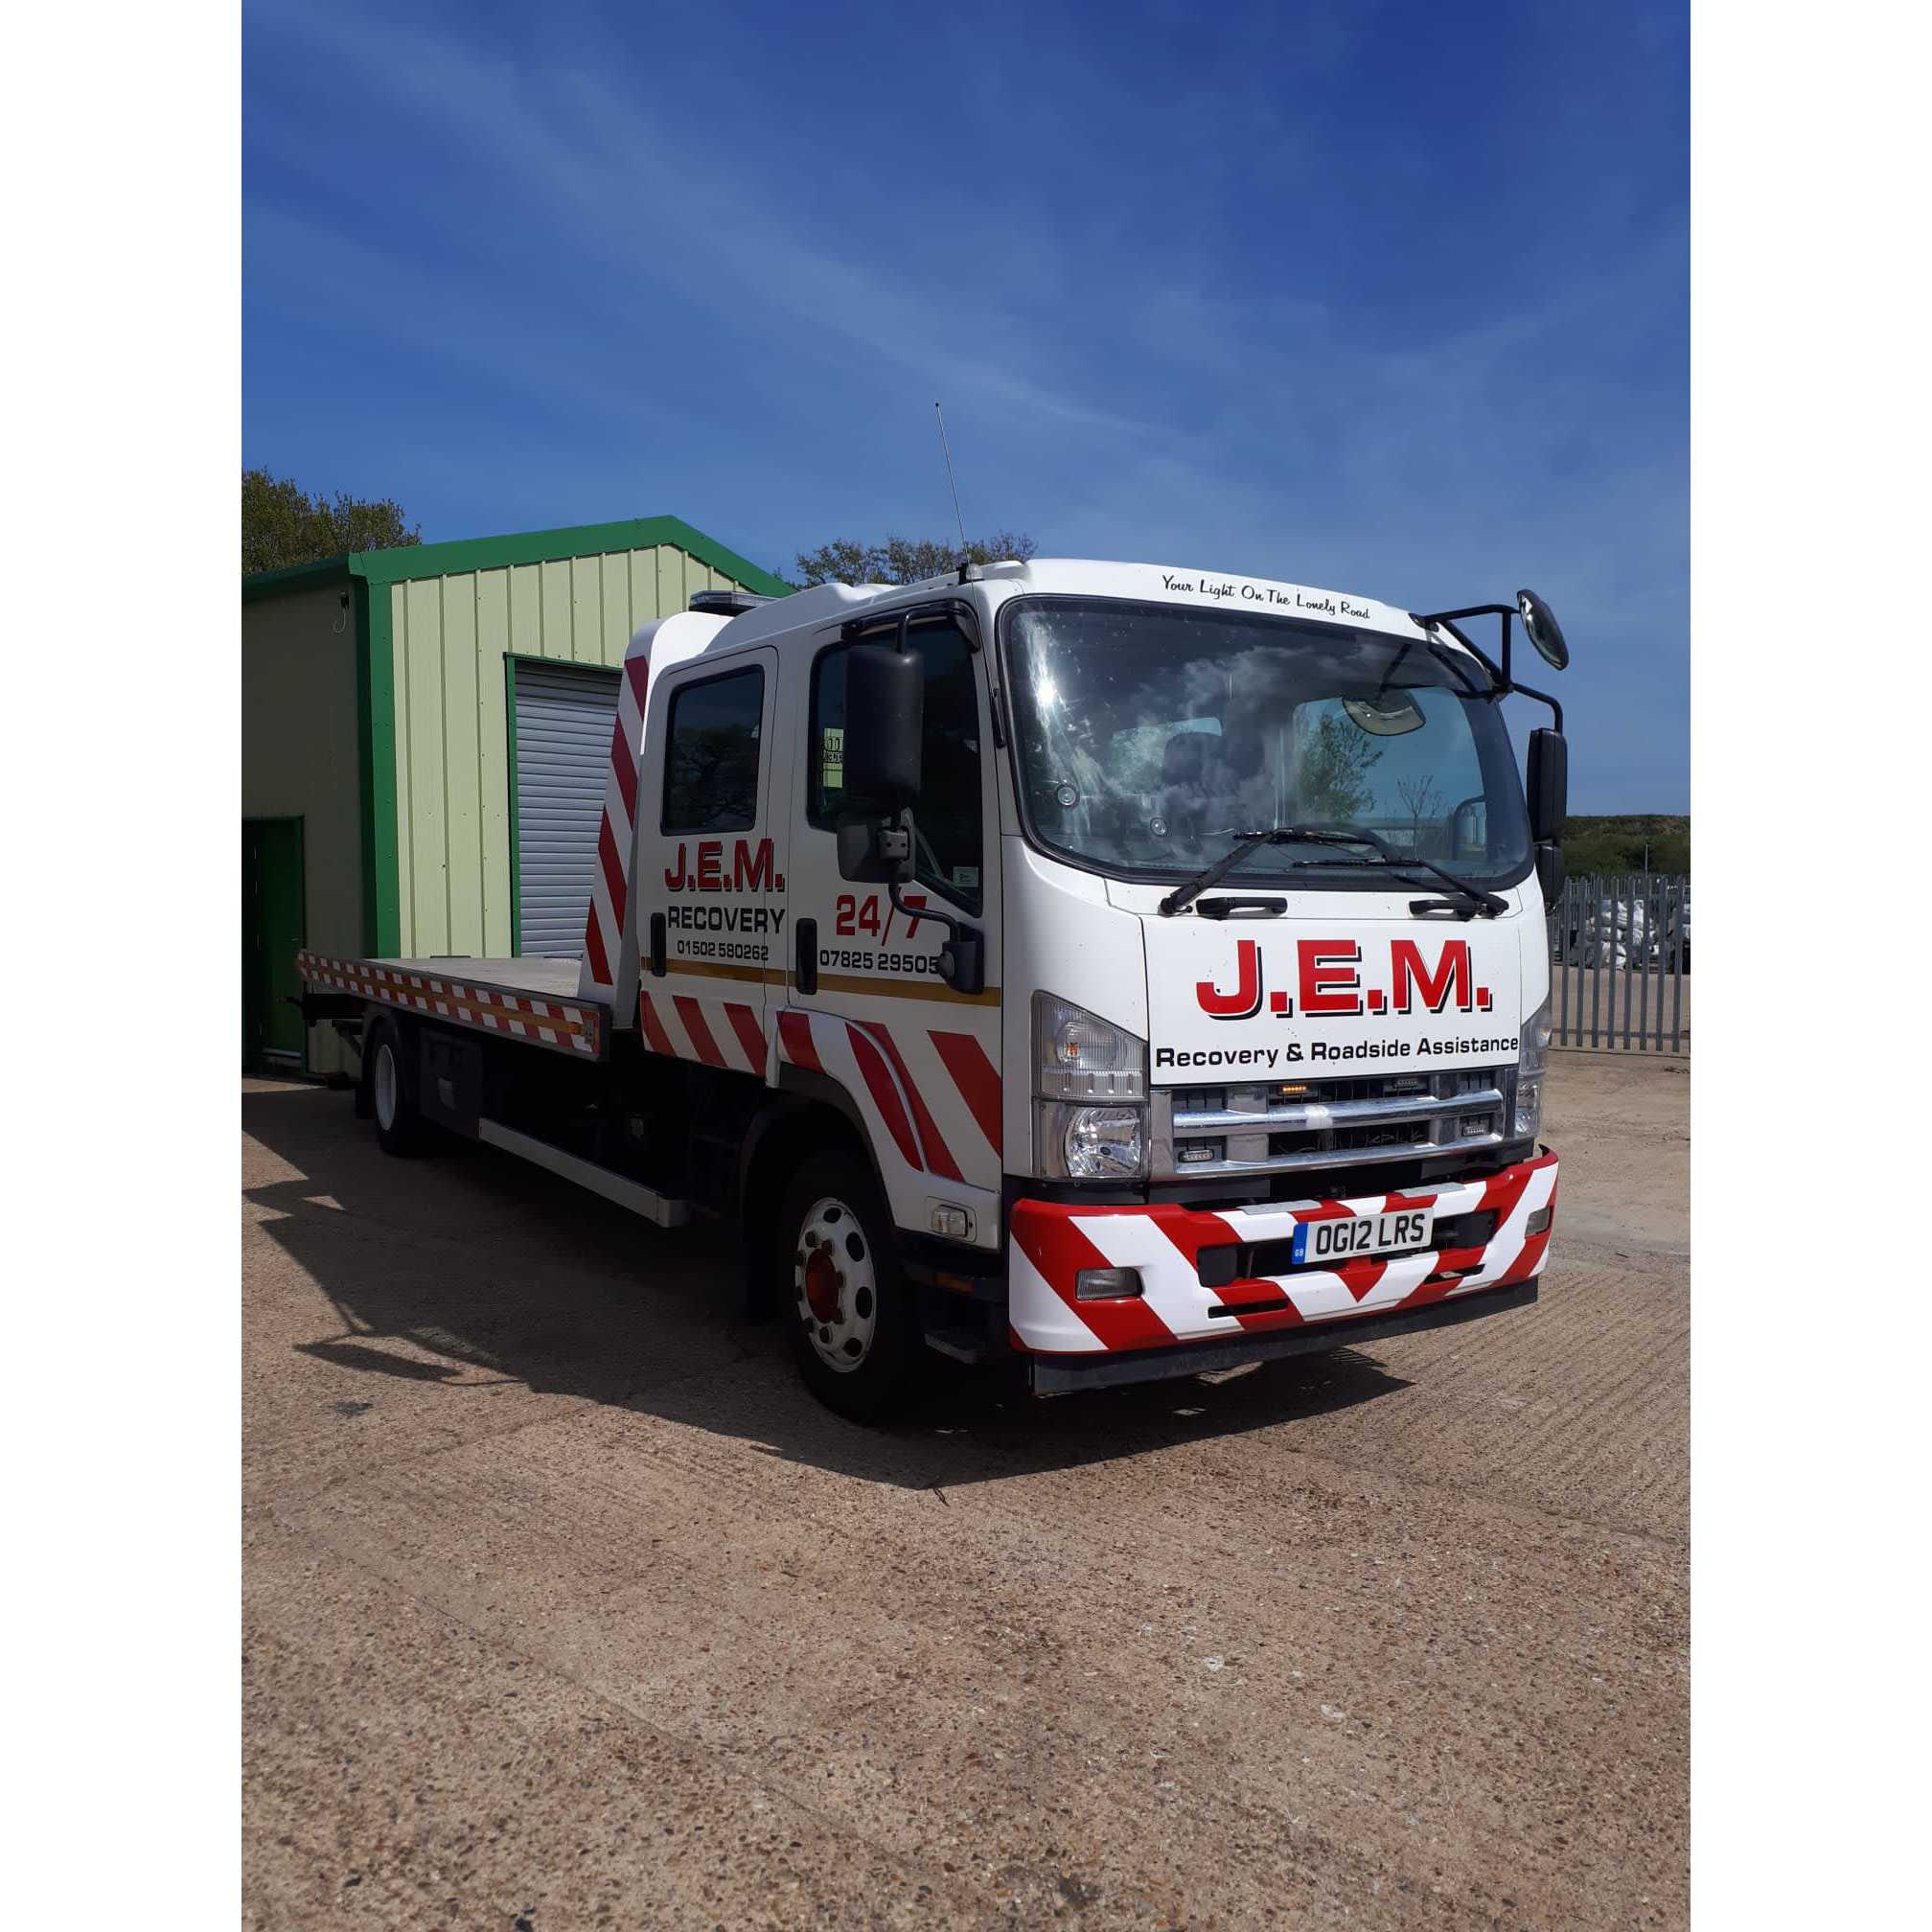 LOGO Jem Recovery Beccles 01502 464746